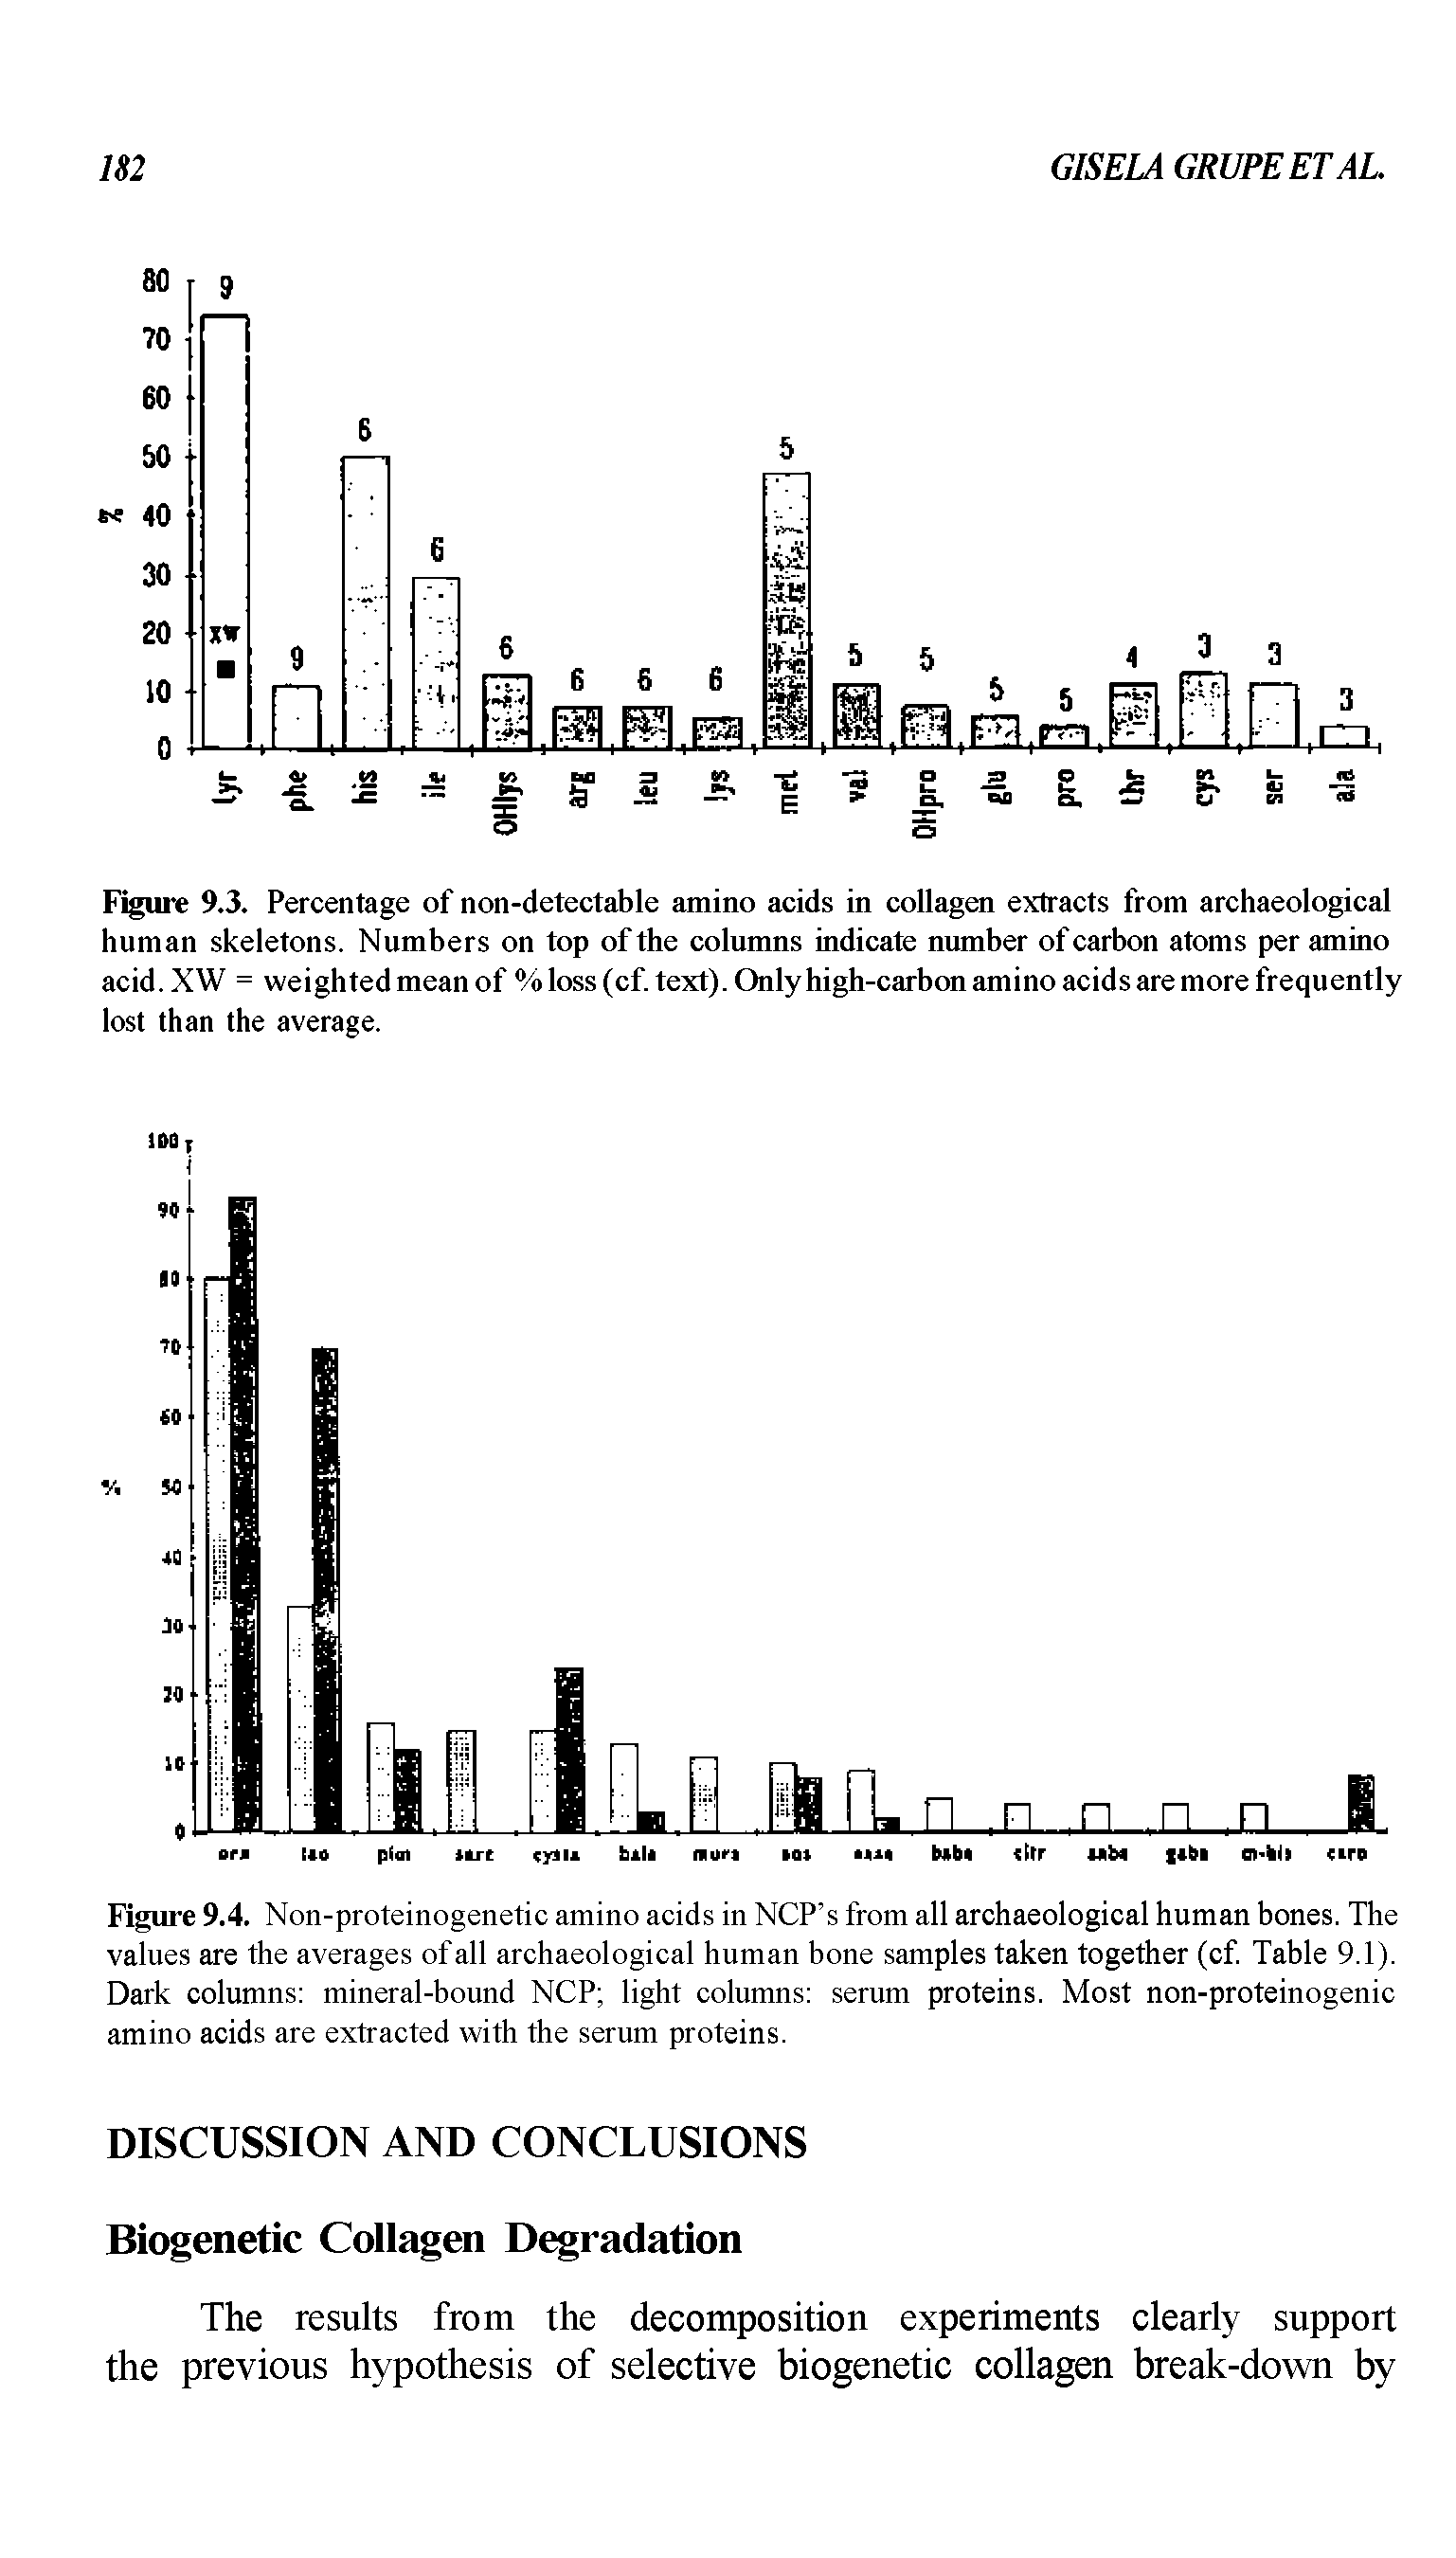 Figure 9.3. Percentage of non-detectable amino acids in collagen extracts from archaeological human skeletons. Numbers on top of the columns indicate number of carbon atoms per amino acid. XW = weighted mean of % loss (cf. text). Only high-carbon amino acids are more frequently lost than the average.